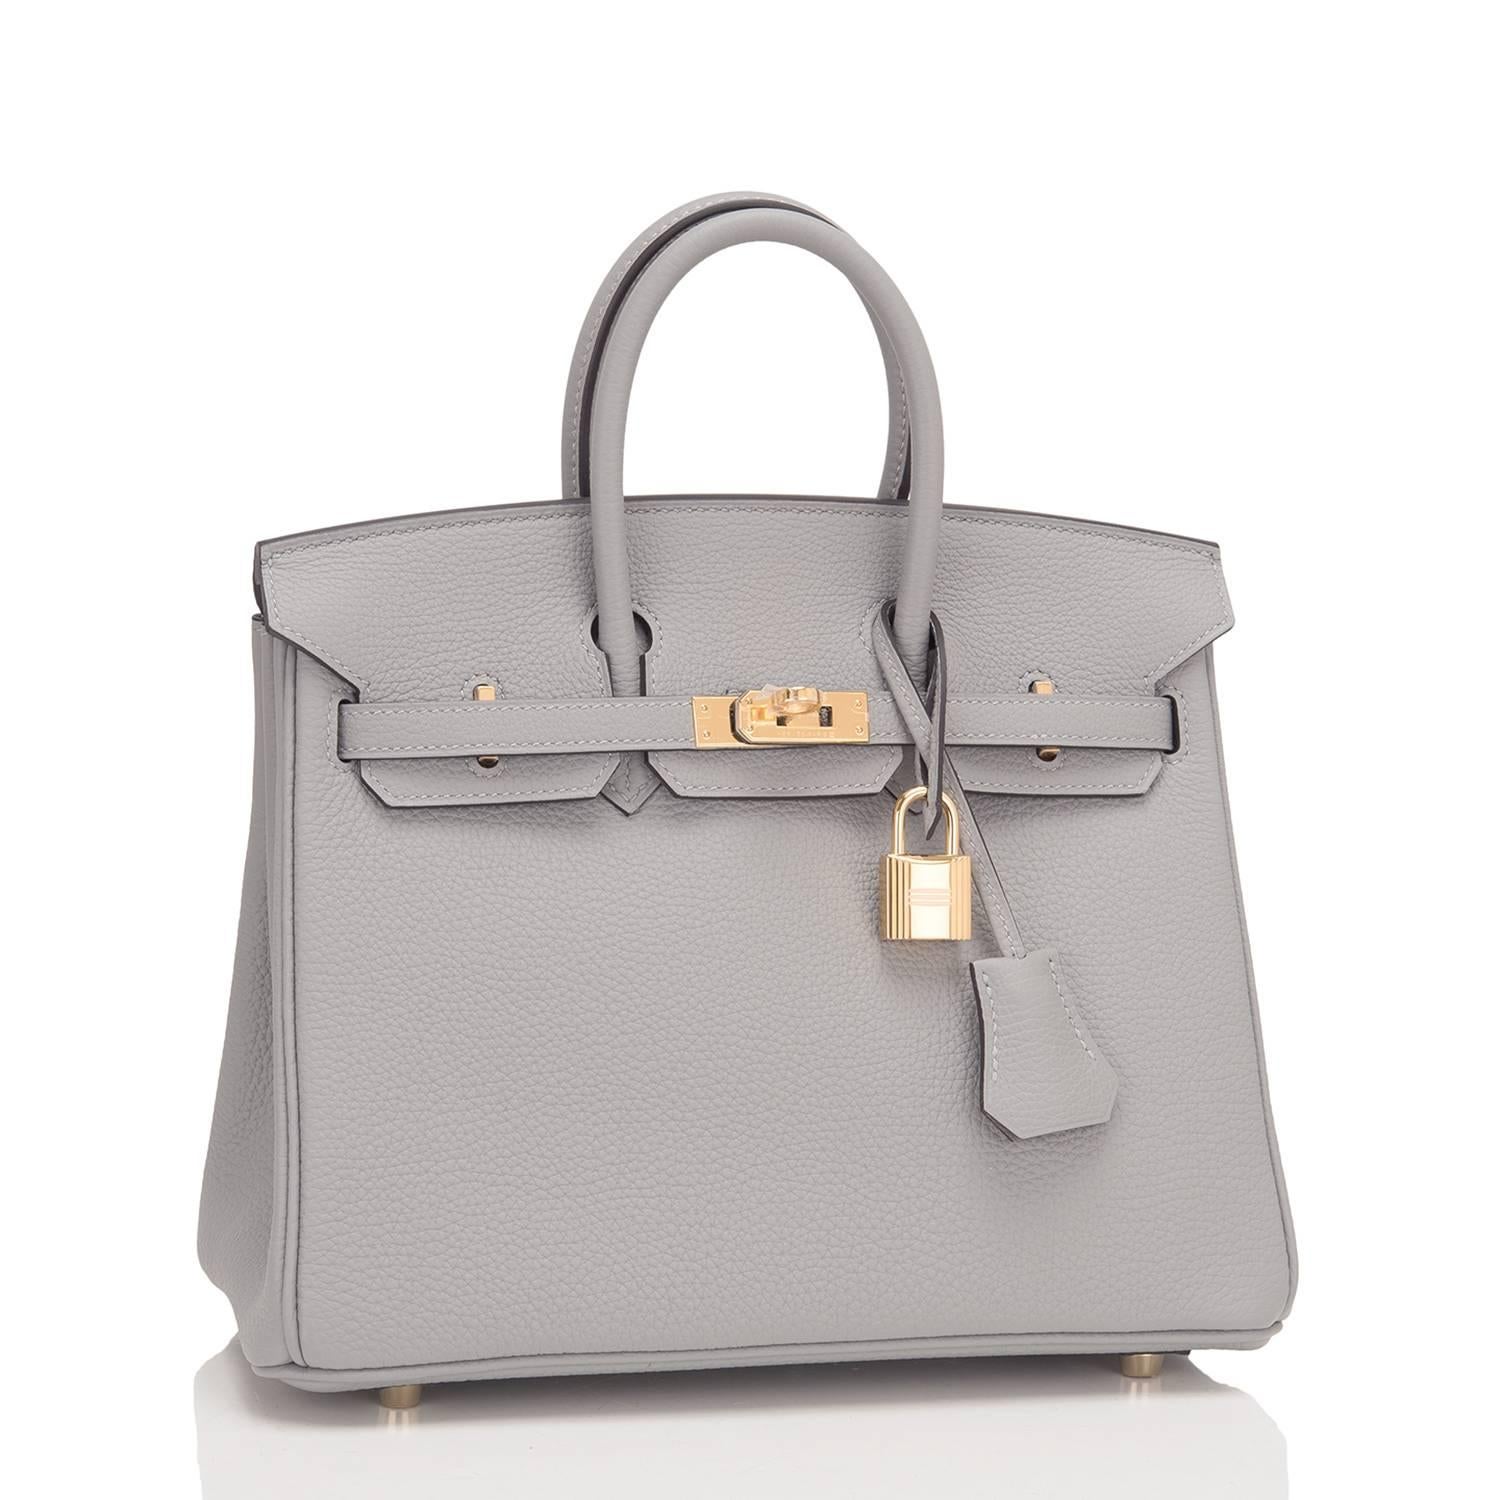 Hermes Gris Mouette Birkin 25cm of togo leather with gold hardware.

This Birkin has tonal stitching, a front toggle closure, a clochette with lock and two keys, and double rolled handles.

The interior is lined with gris mouette chevre and has